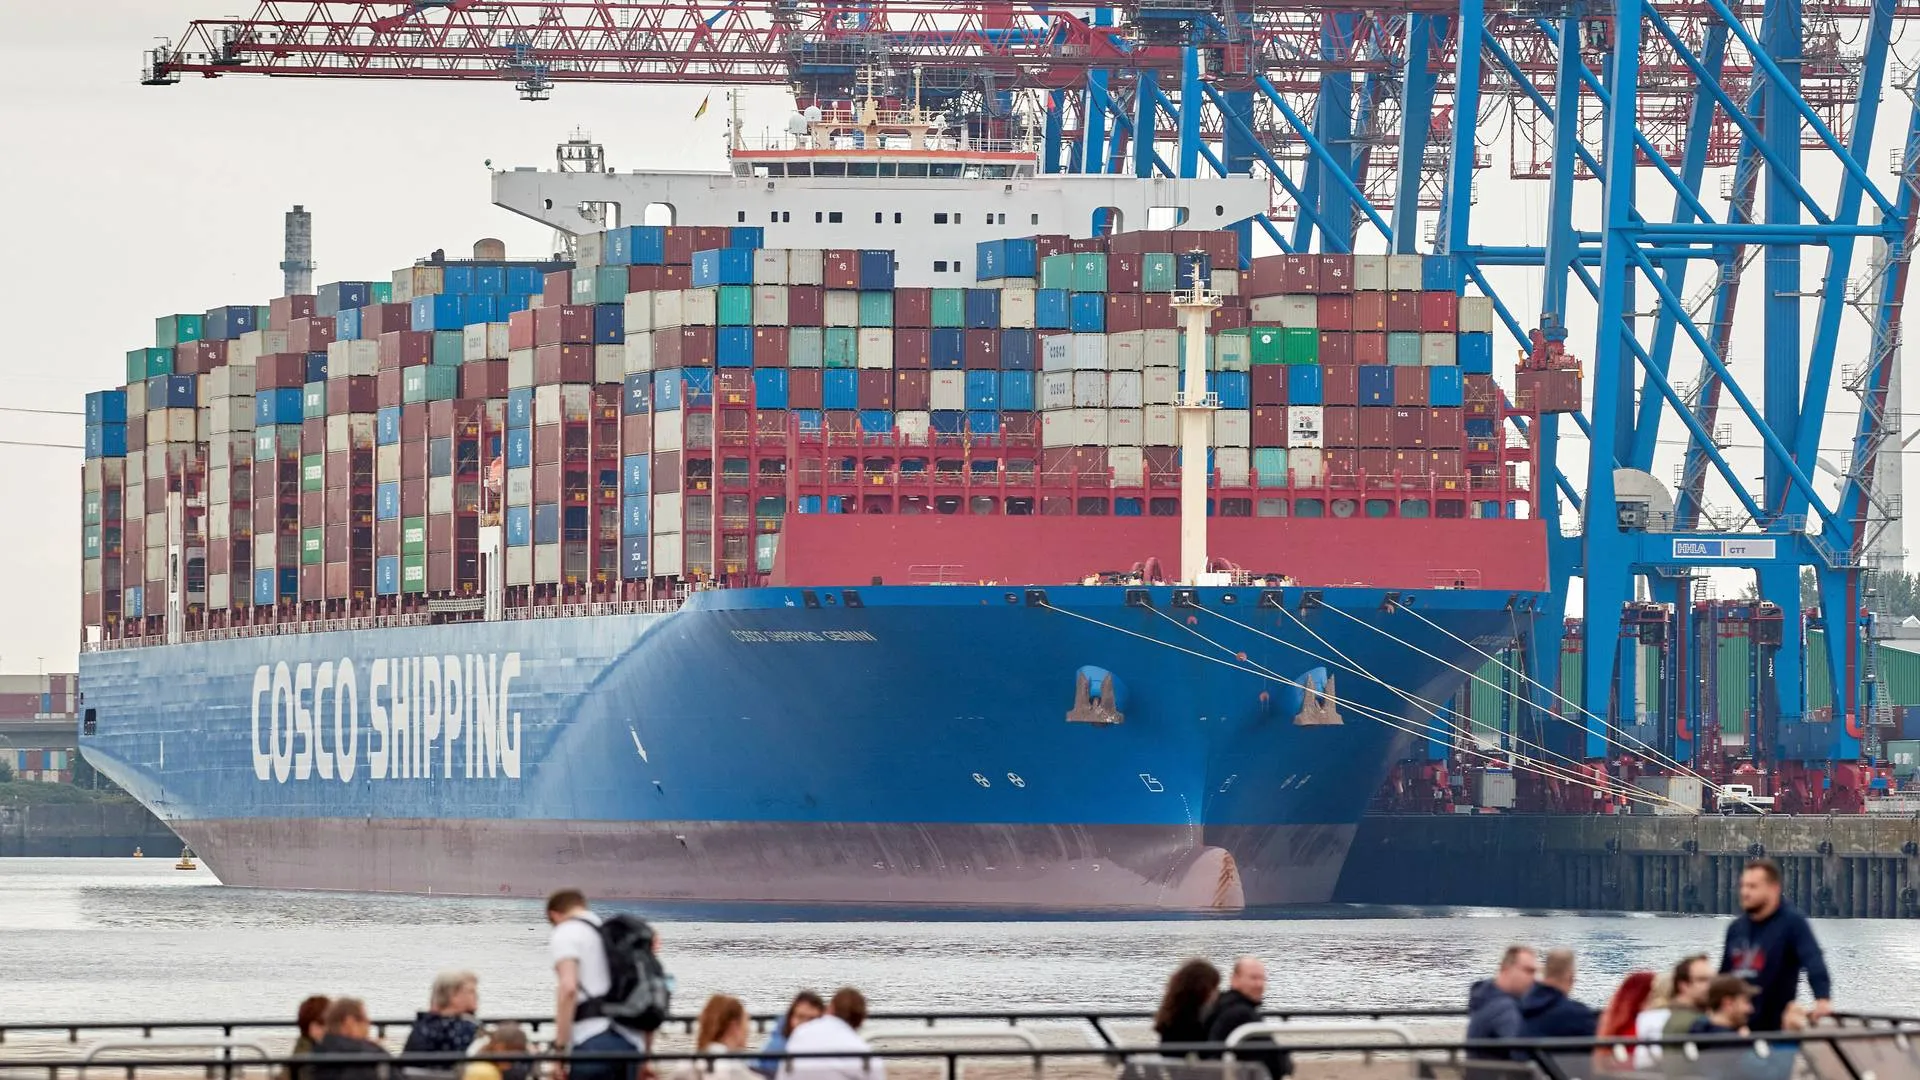 China's Cosco is still courting Germany's largest port